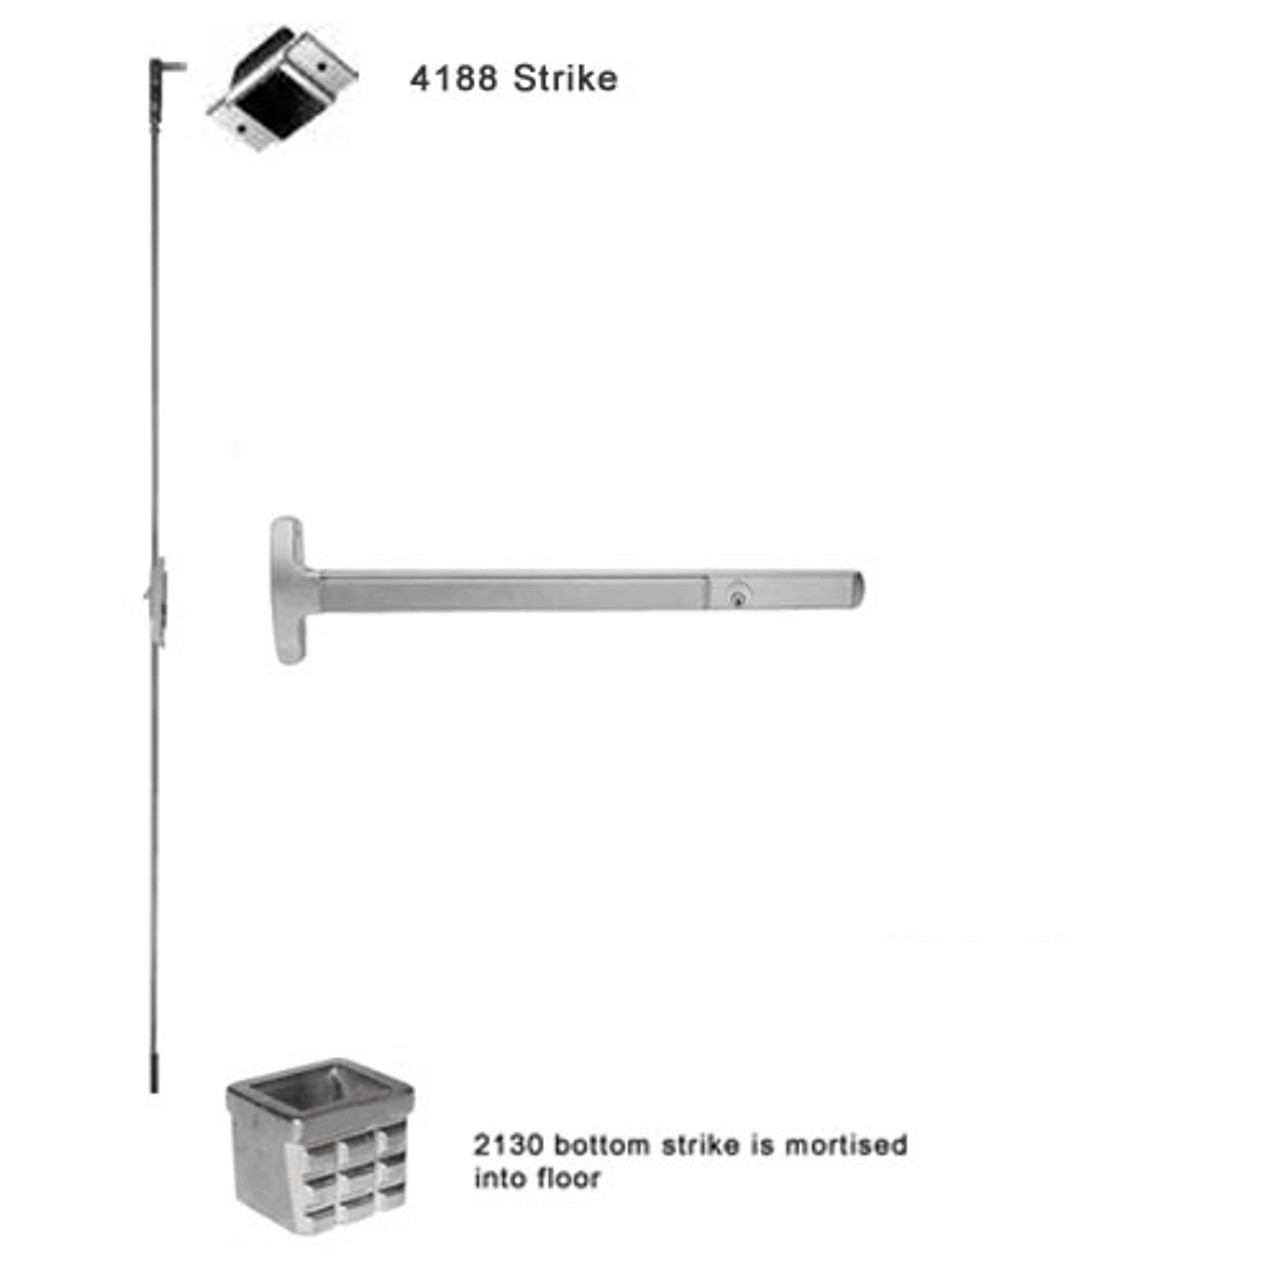 CD24-C-L-BE-DANE-US28-2-RHR Falcon 24 Series Concealed Vertical Rod Device 712L-BE Dane Lever Trim with Blank Escutcheon in Anodized Aluminum